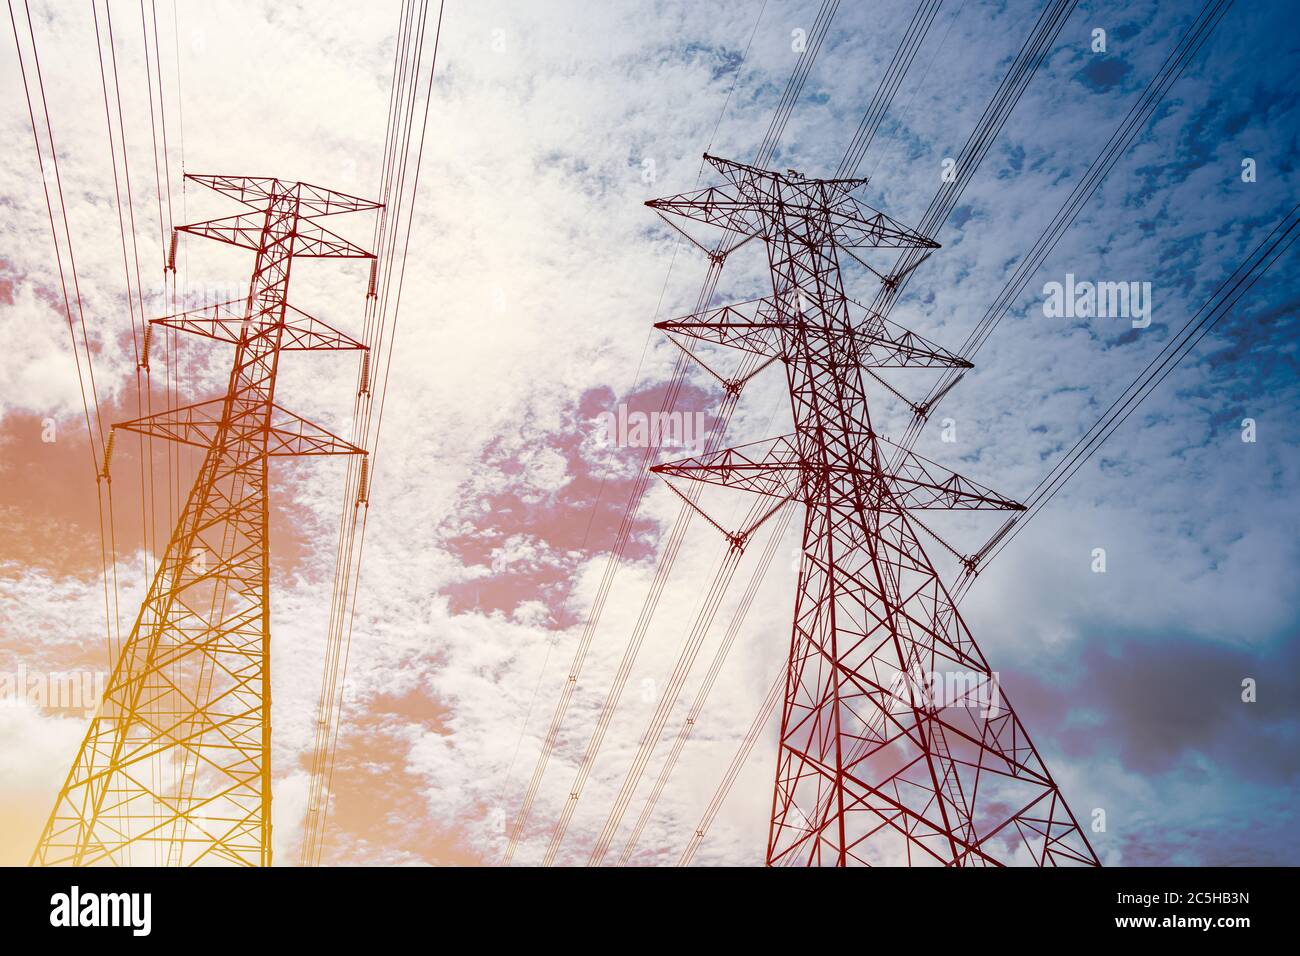 High voltage post Industry urban Electricity Power Transmission Lines Cable outdoor landscape. Stock Photo